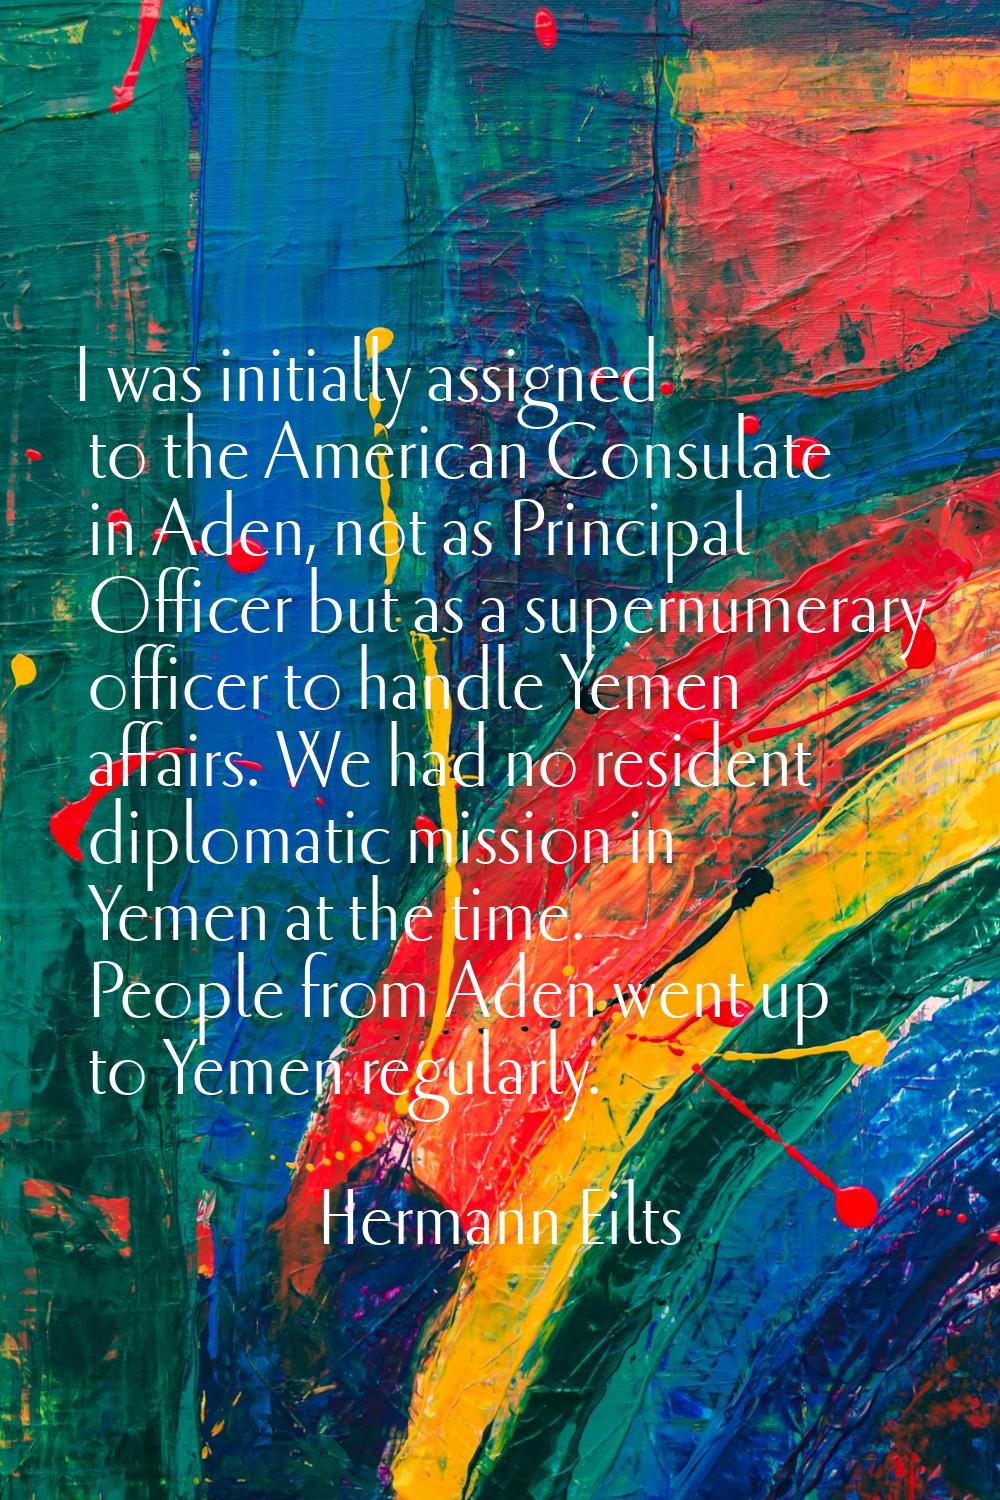 I was initially assigned to the American Consulate in Aden, not as Principal Officer but as a super